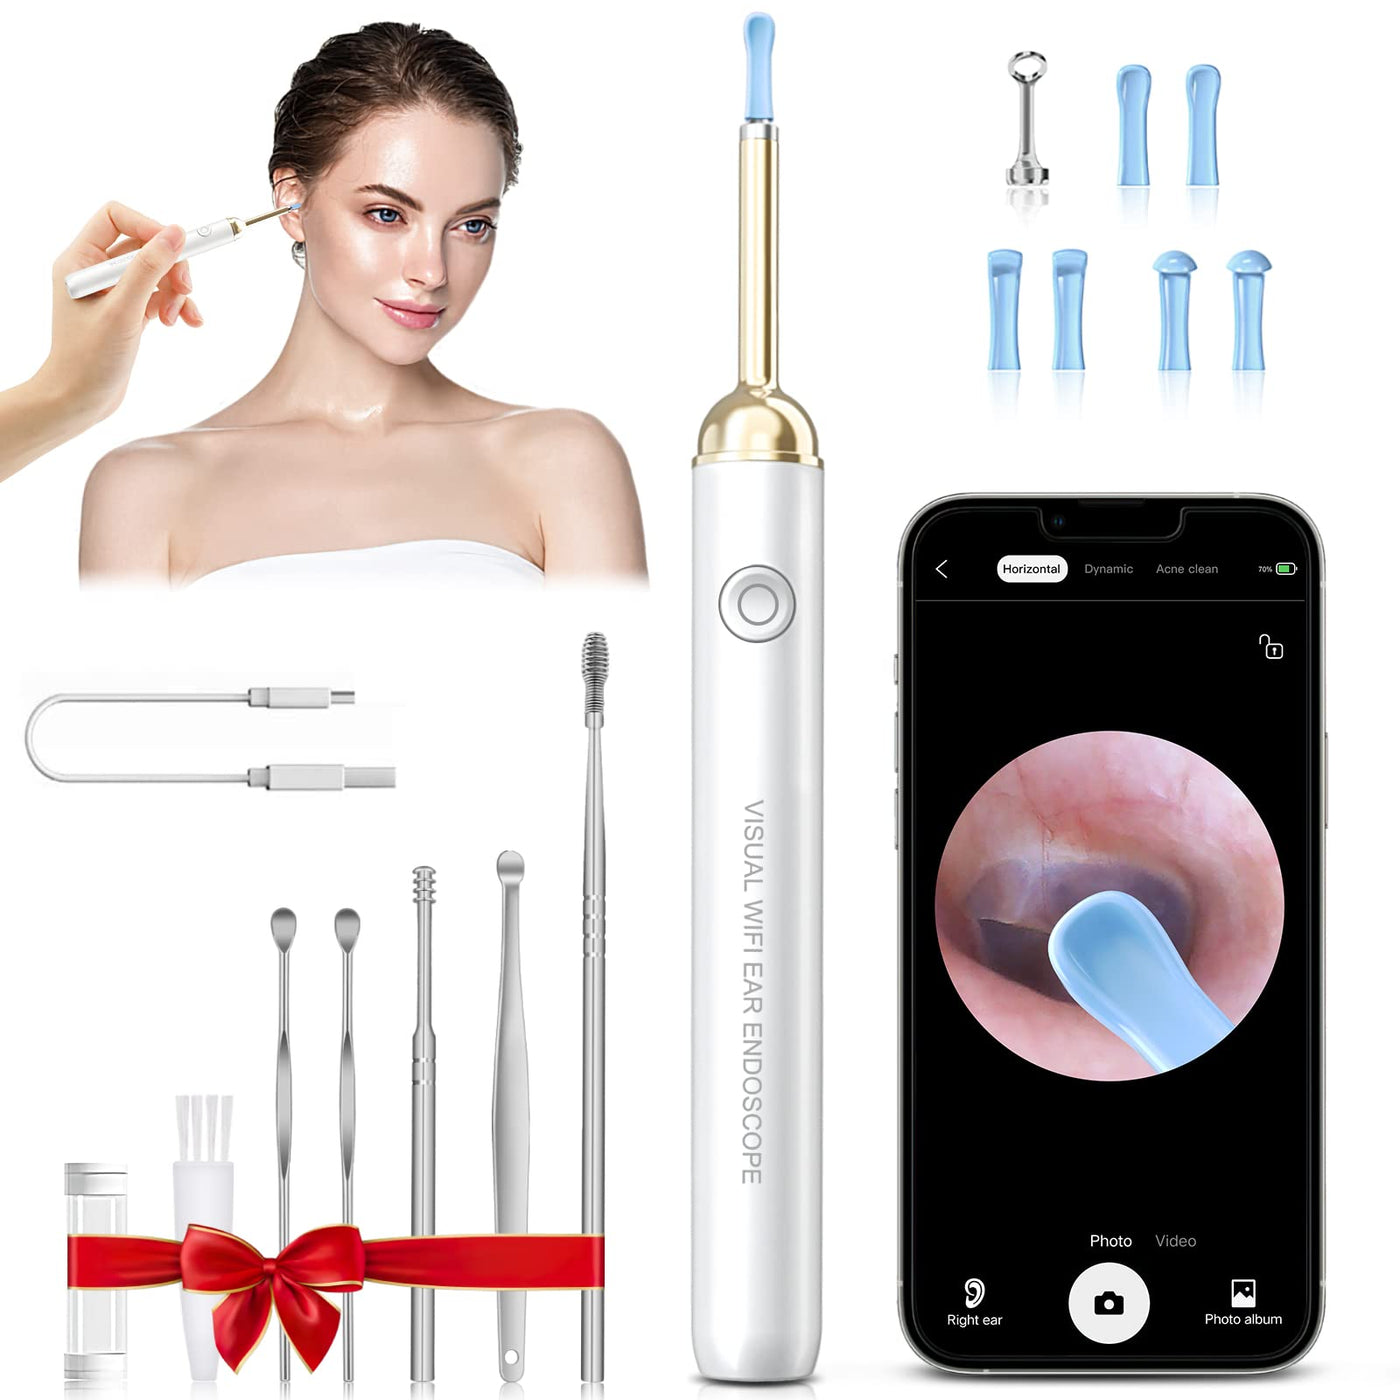 RILIAM Ear Wax Removal, Ear Wax Removal Tool - Ear Cleaning Kit with  Camera, 1080P FHD Ear Scope Otoscope with 6 LED Lights, IP67 Waterproof Ear  Wax Removal Kit for iPhone, iPad